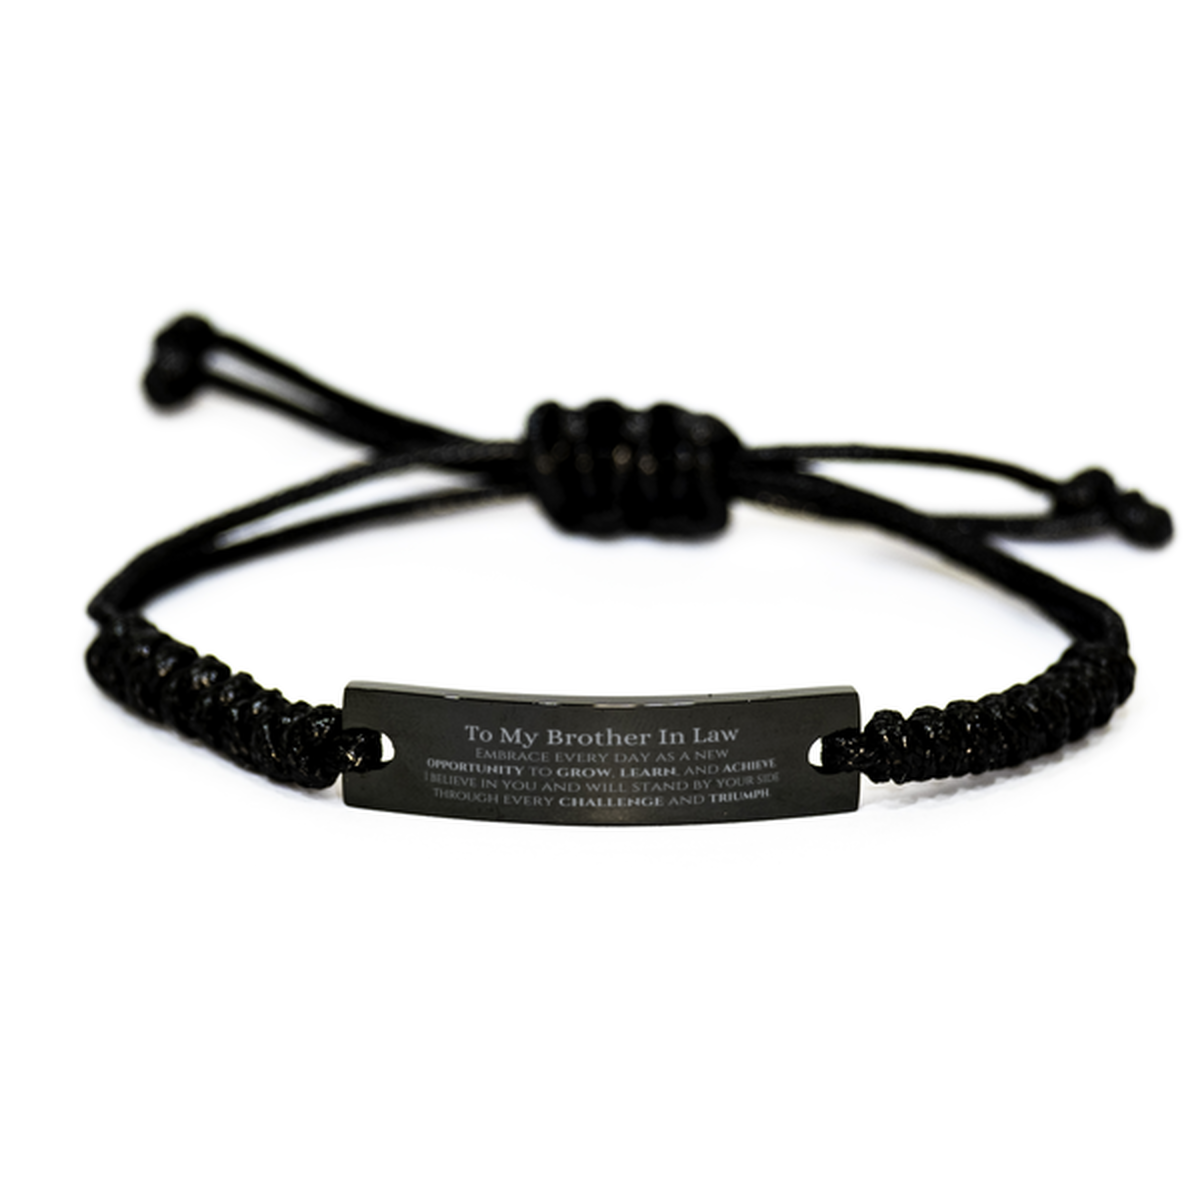 To My Brother In Law Gifts, I believe in you and will stand by your side, Inspirational Black Rope Bracelet For Brother In Law, Birthday Christmas Motivational Brother In Law Gifts